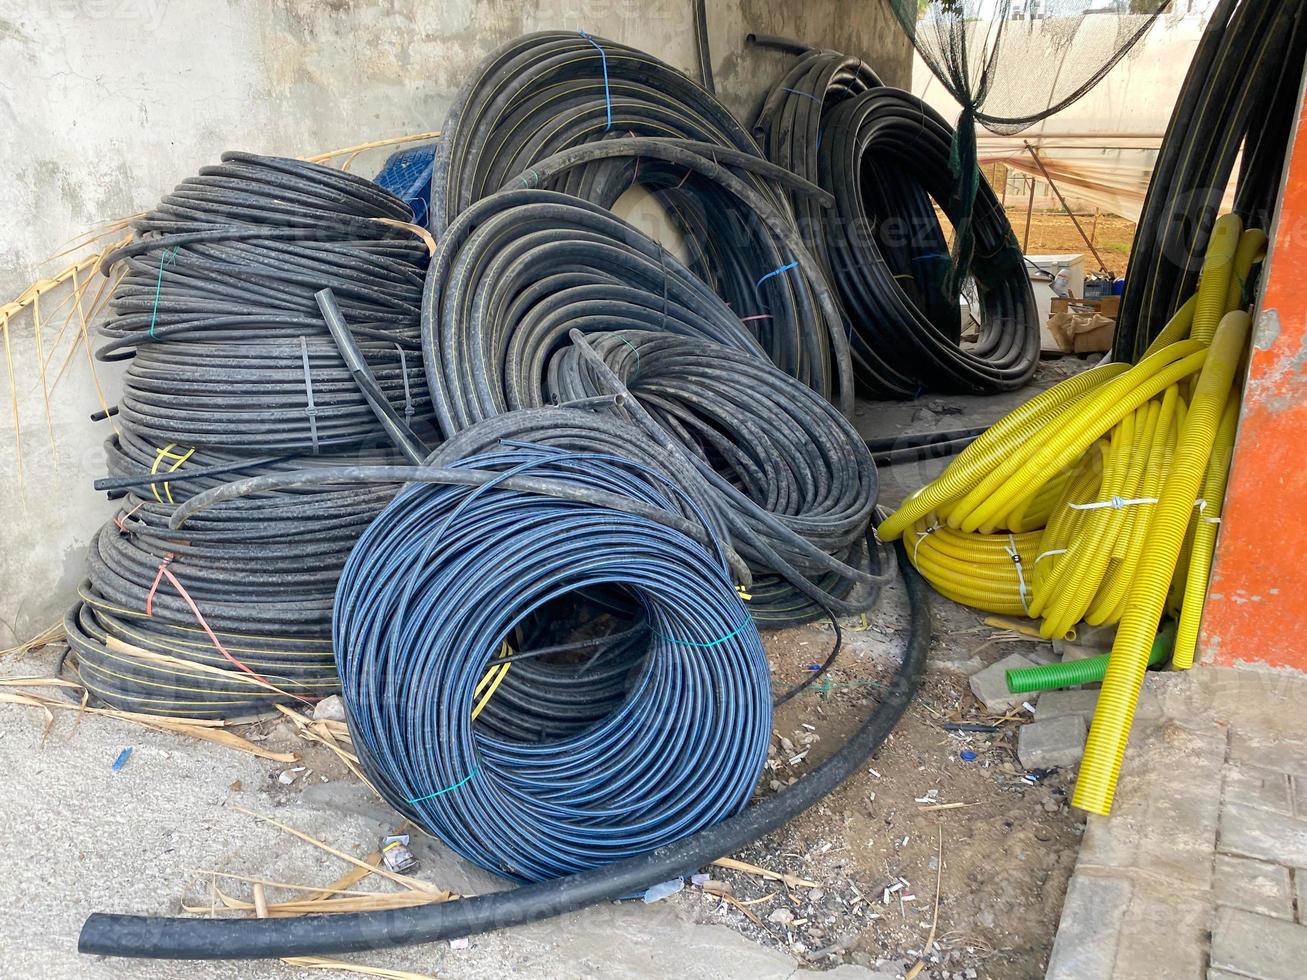 Many large coils of black cables in plastic insulation or electrical wires for electricity in an industrial warehouse photo